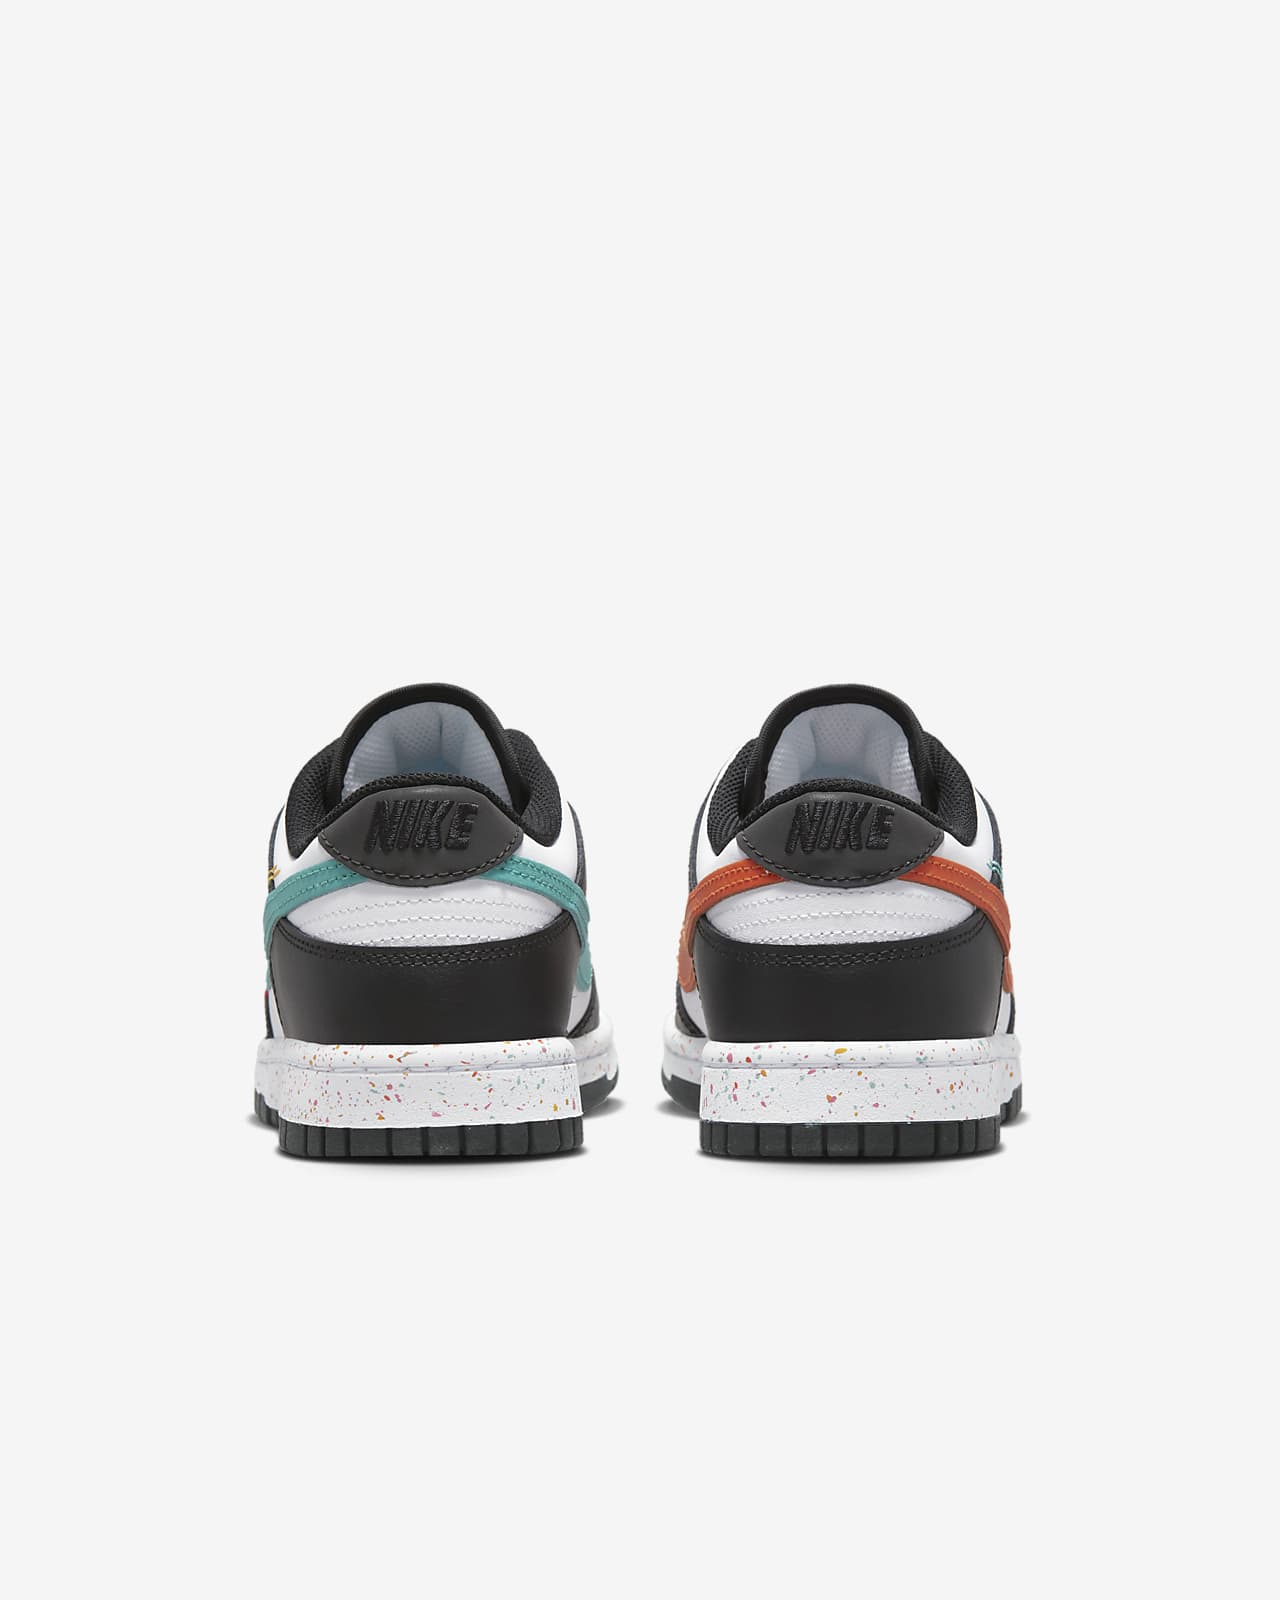 Nike Femme Dunk Low Si Baskets, White Light Curry Washed Teal